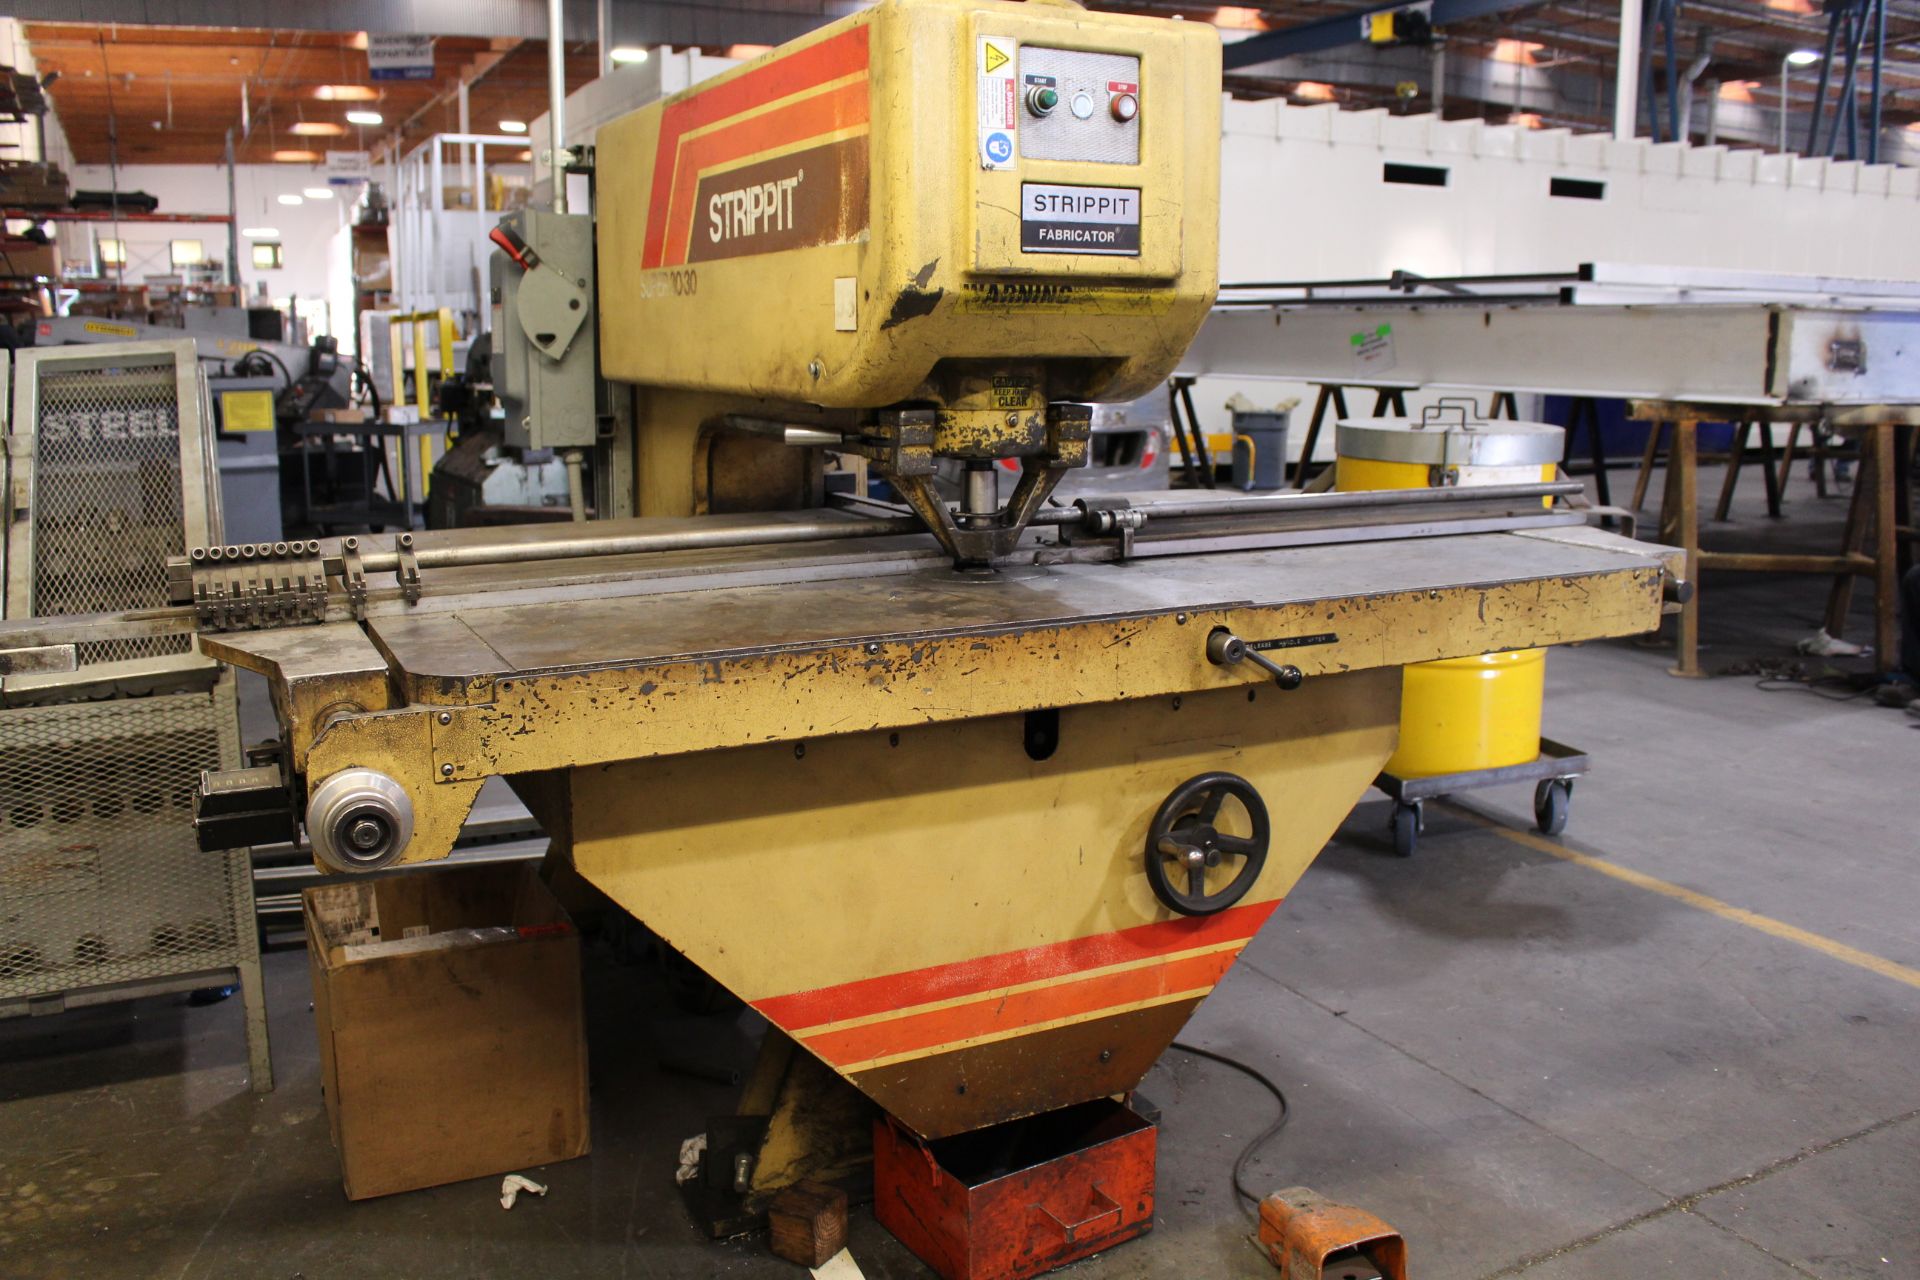 STRIPPIT SUPER 30/30 SINGLE END PUNCH, S/N 201341284, CABINET OF PUNCHES & TOOLING - Image 4 of 10